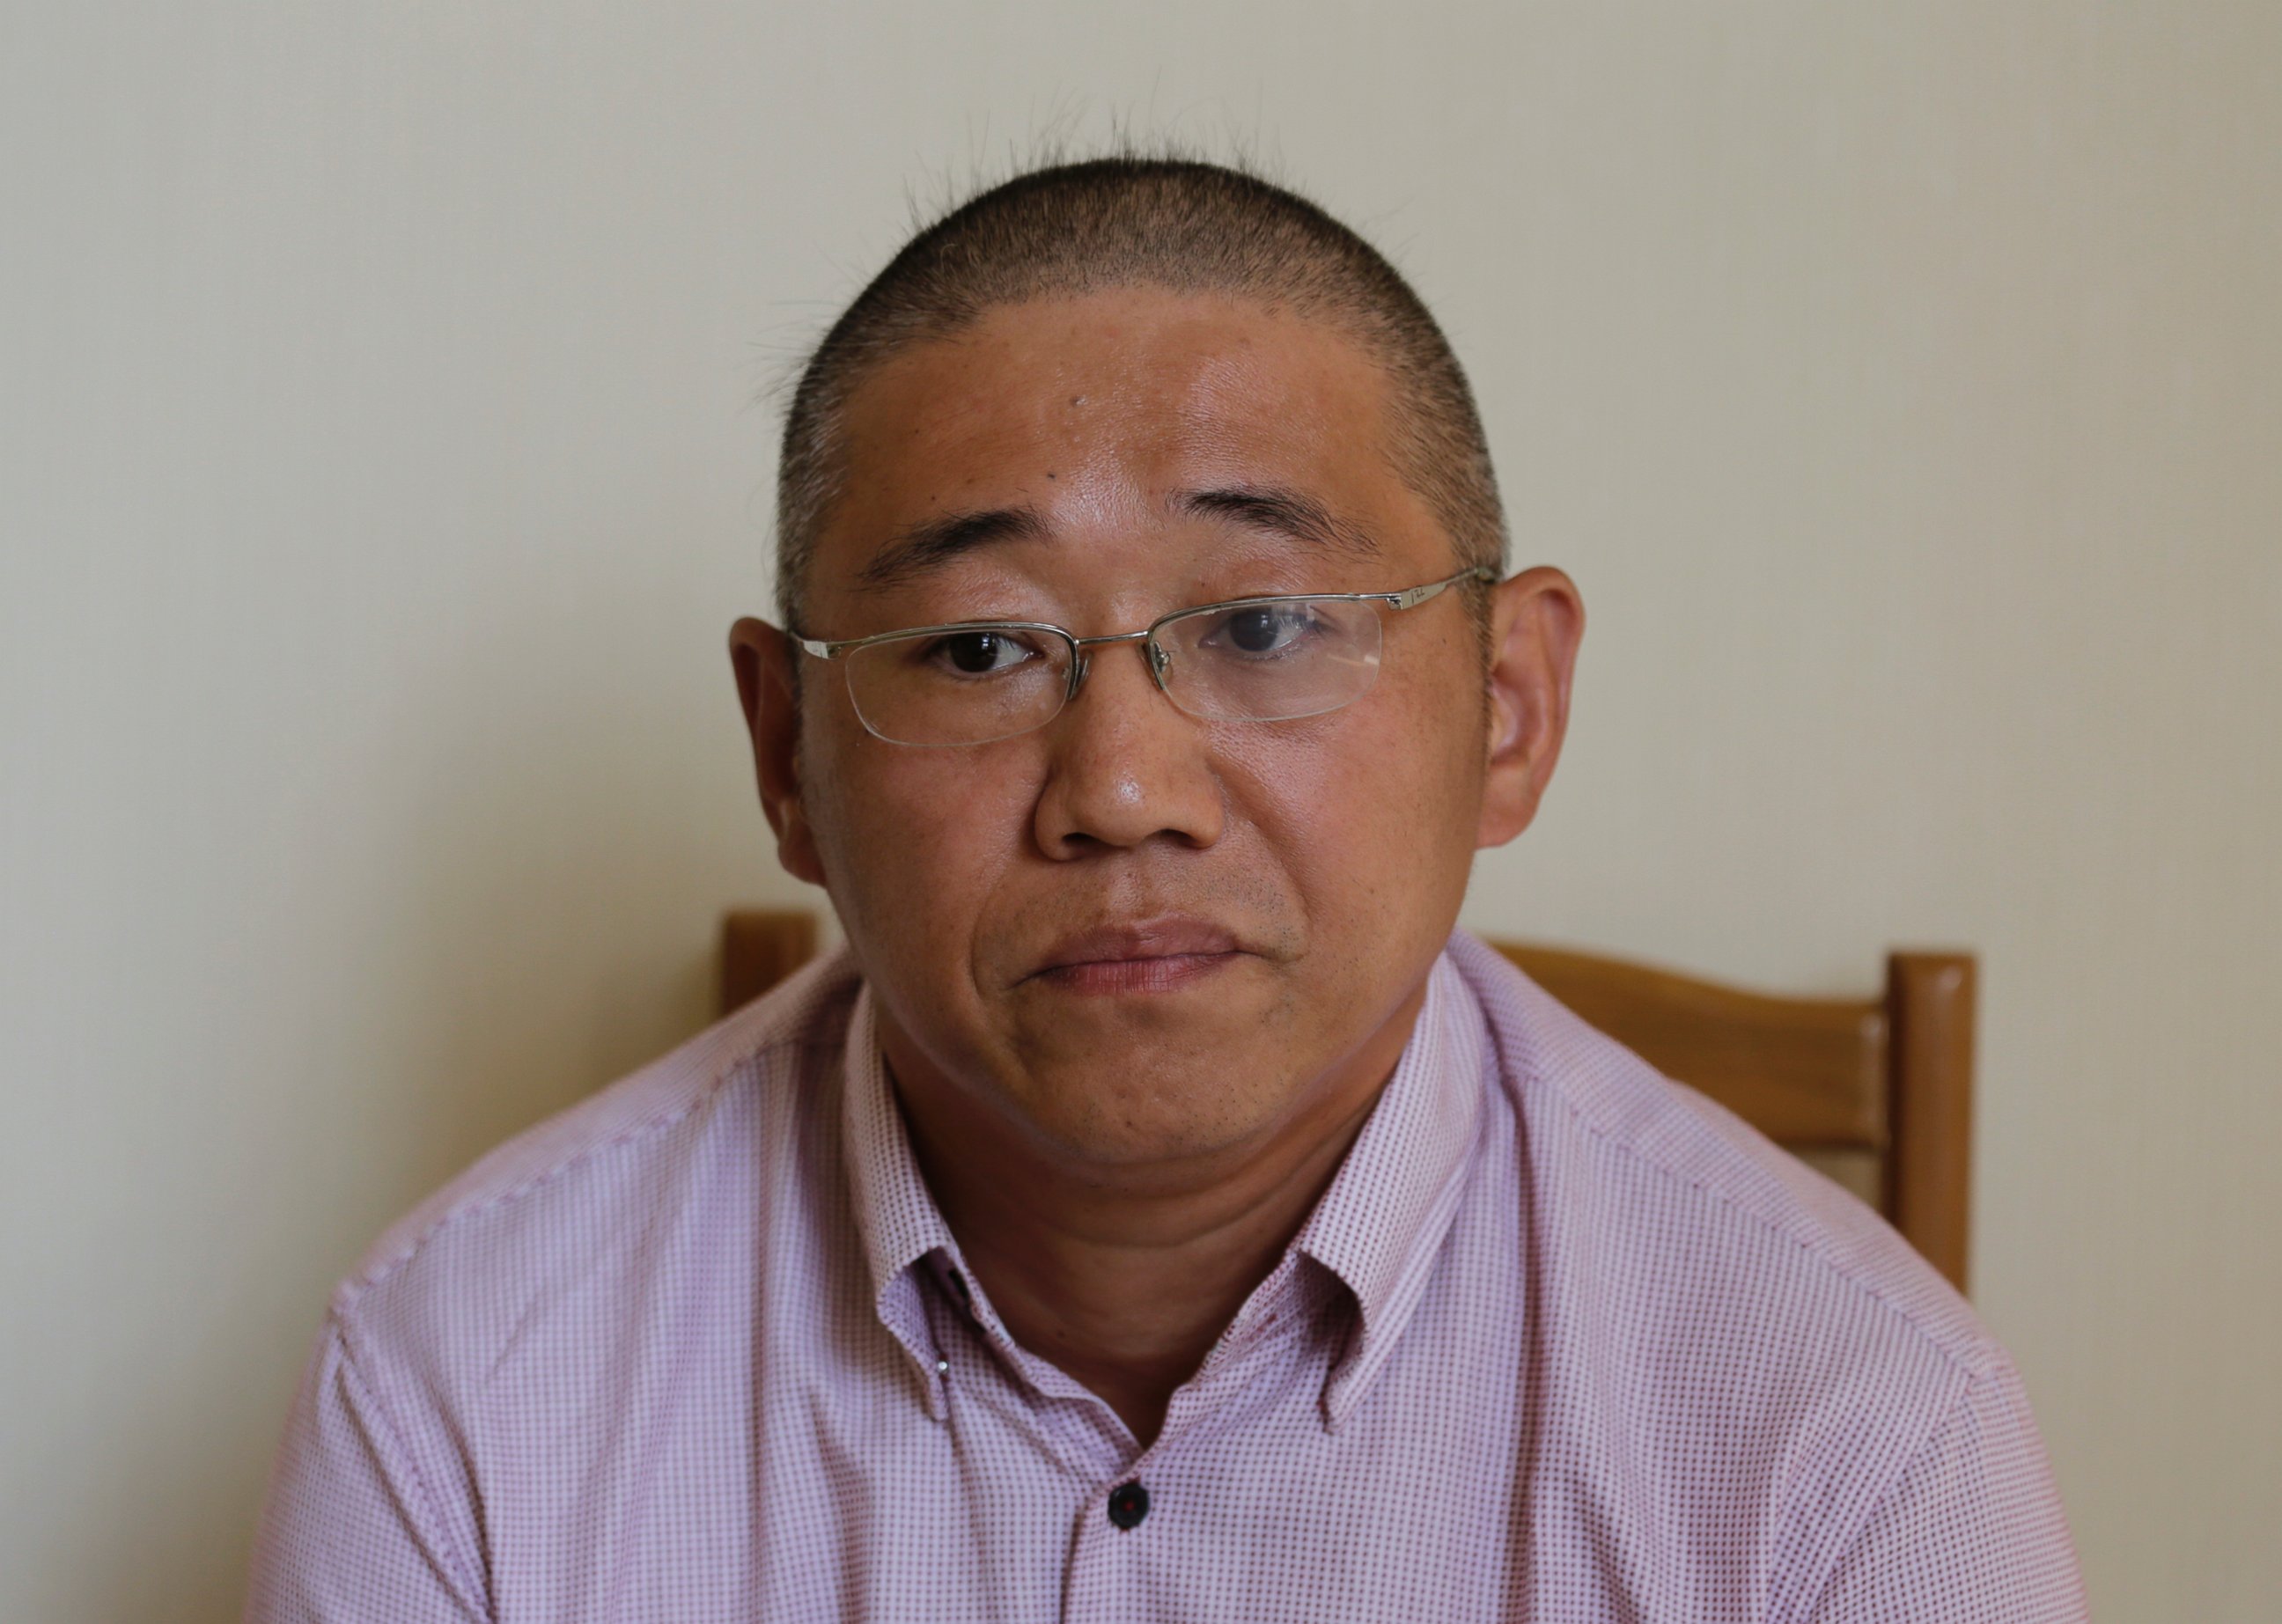 PHOTO: In this Sept. 1, 2014 file photo, Kenneth Bae, an American tour guide and missionary detained in North Korea, serving a 15-year sentence, speaks to The Associated Press in Pyongyang, North Korea.